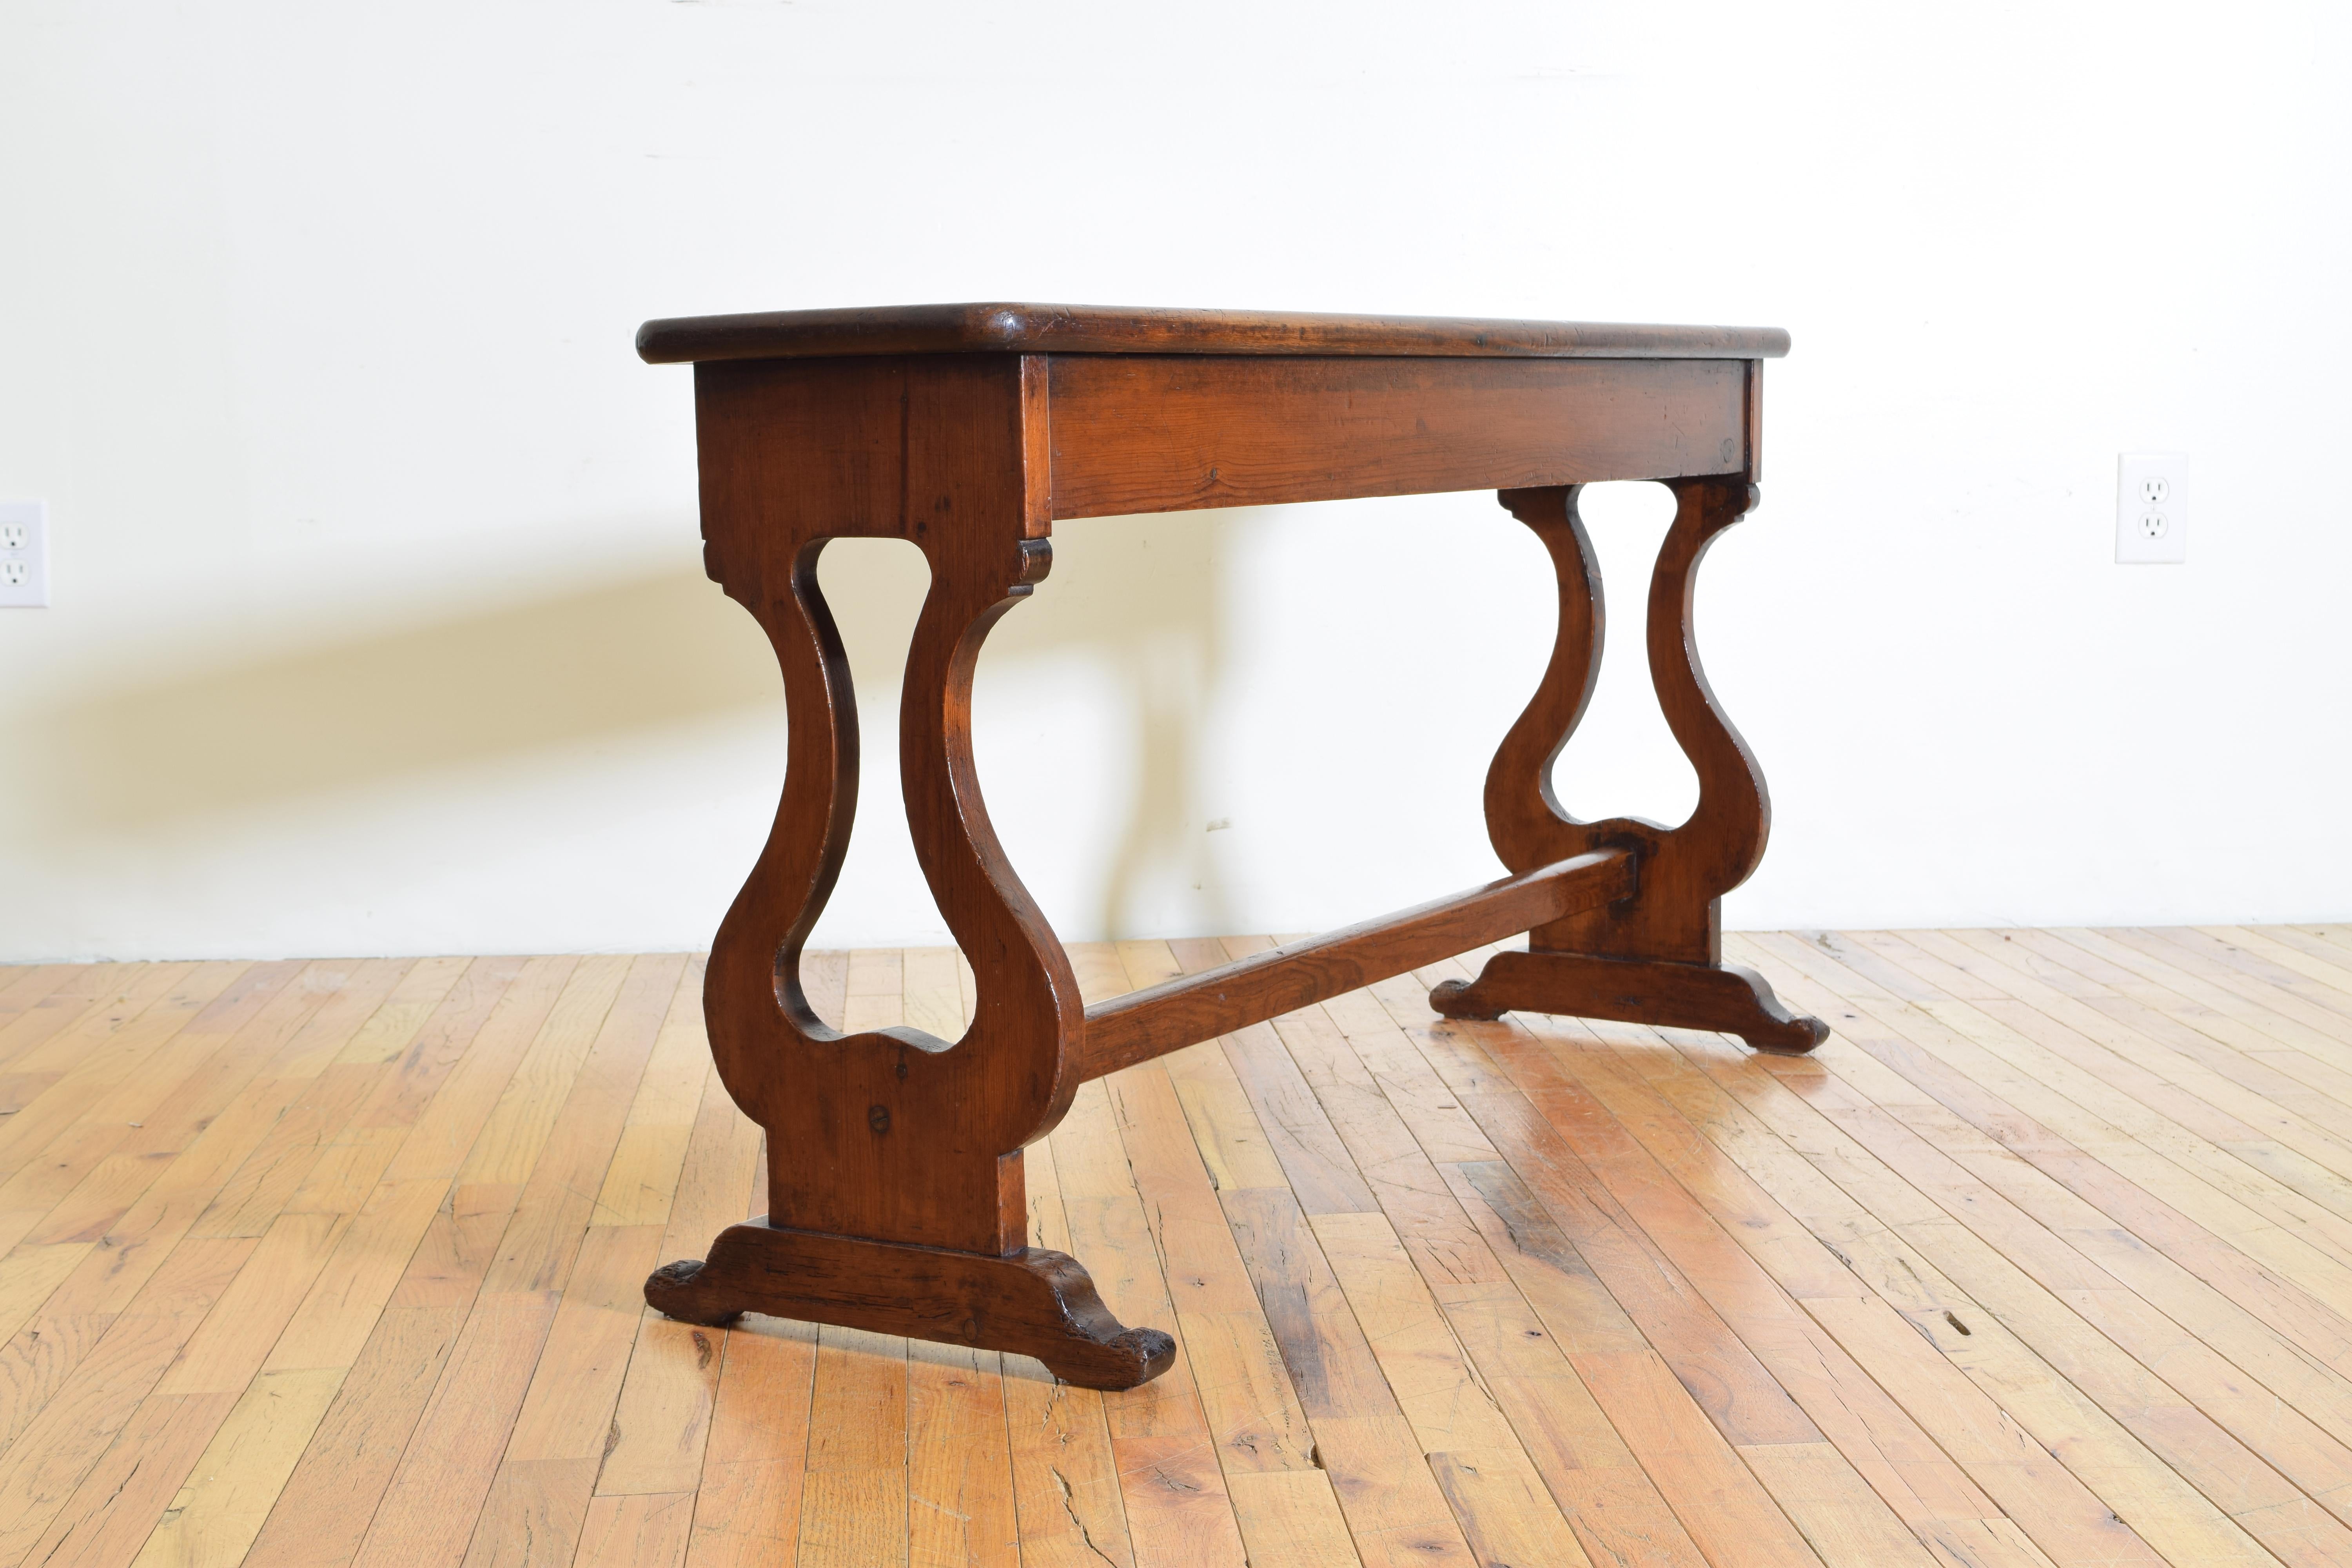 Mid-19th Century French Neoclassic Shaped Oak Bench, Second Half of the 19th Century